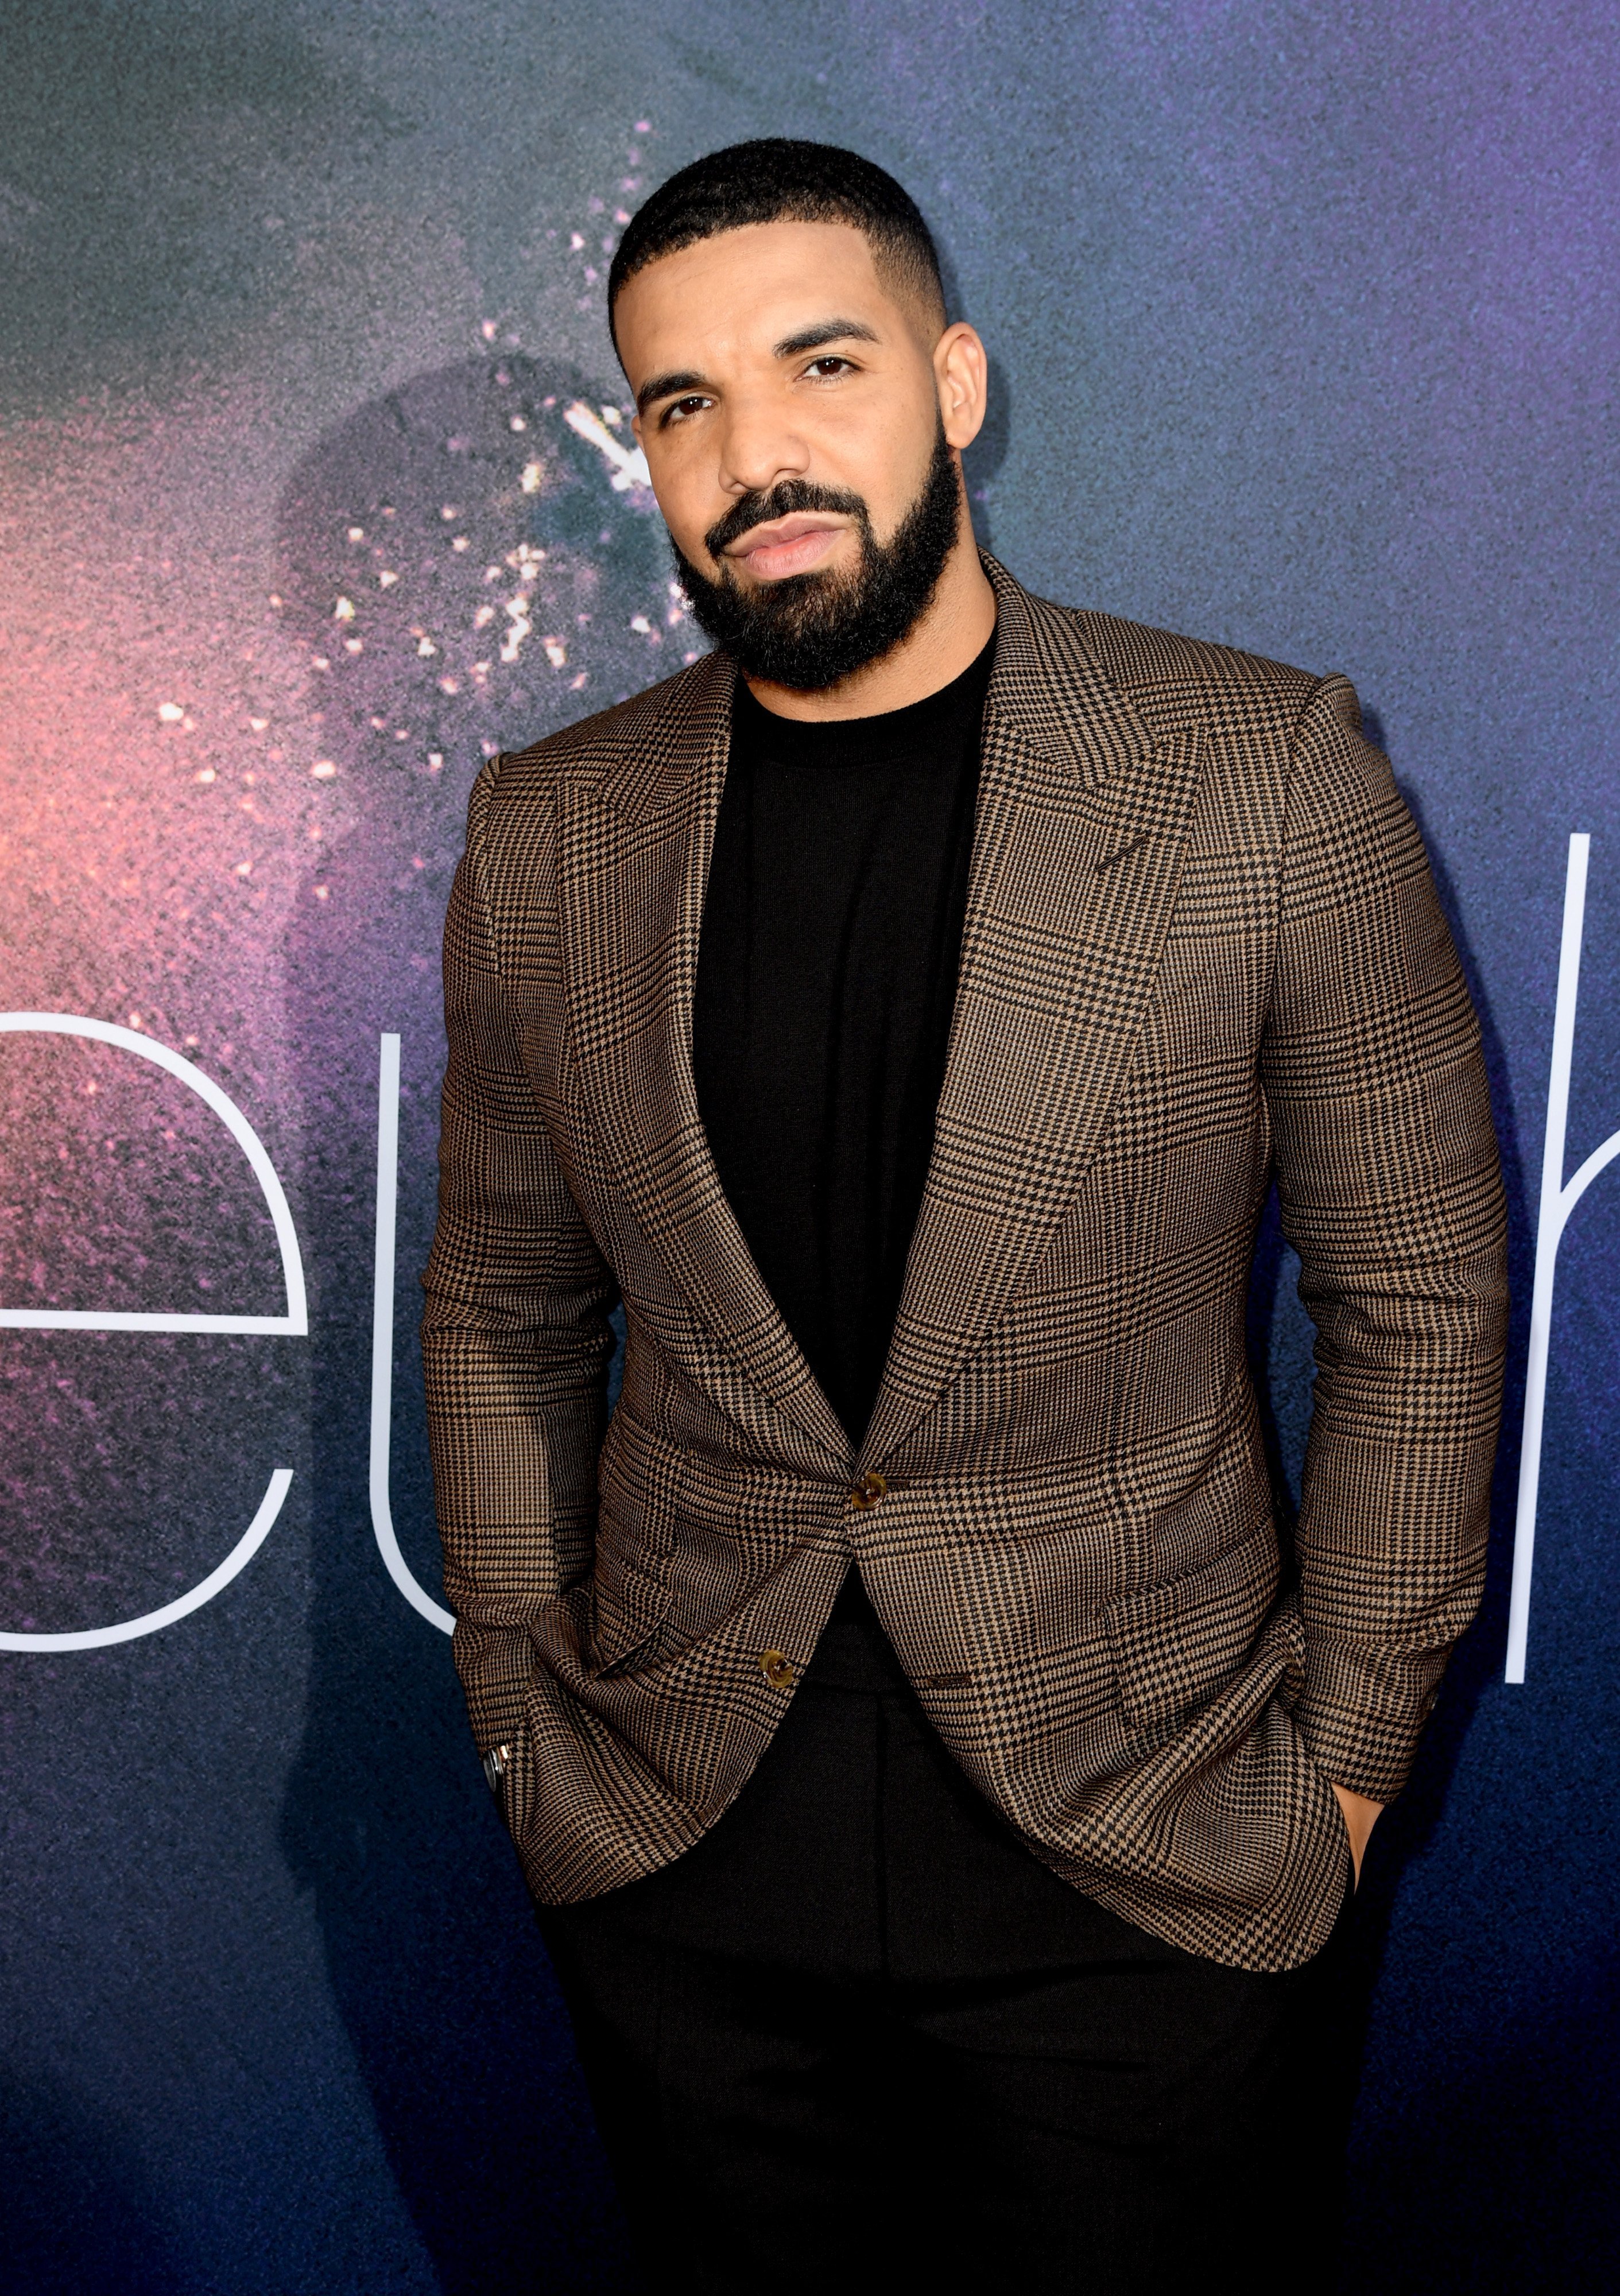 Drake at the LA Premiere of HBO's "Euphoria" on June 04, 2019 in California | Photo: Getty Images